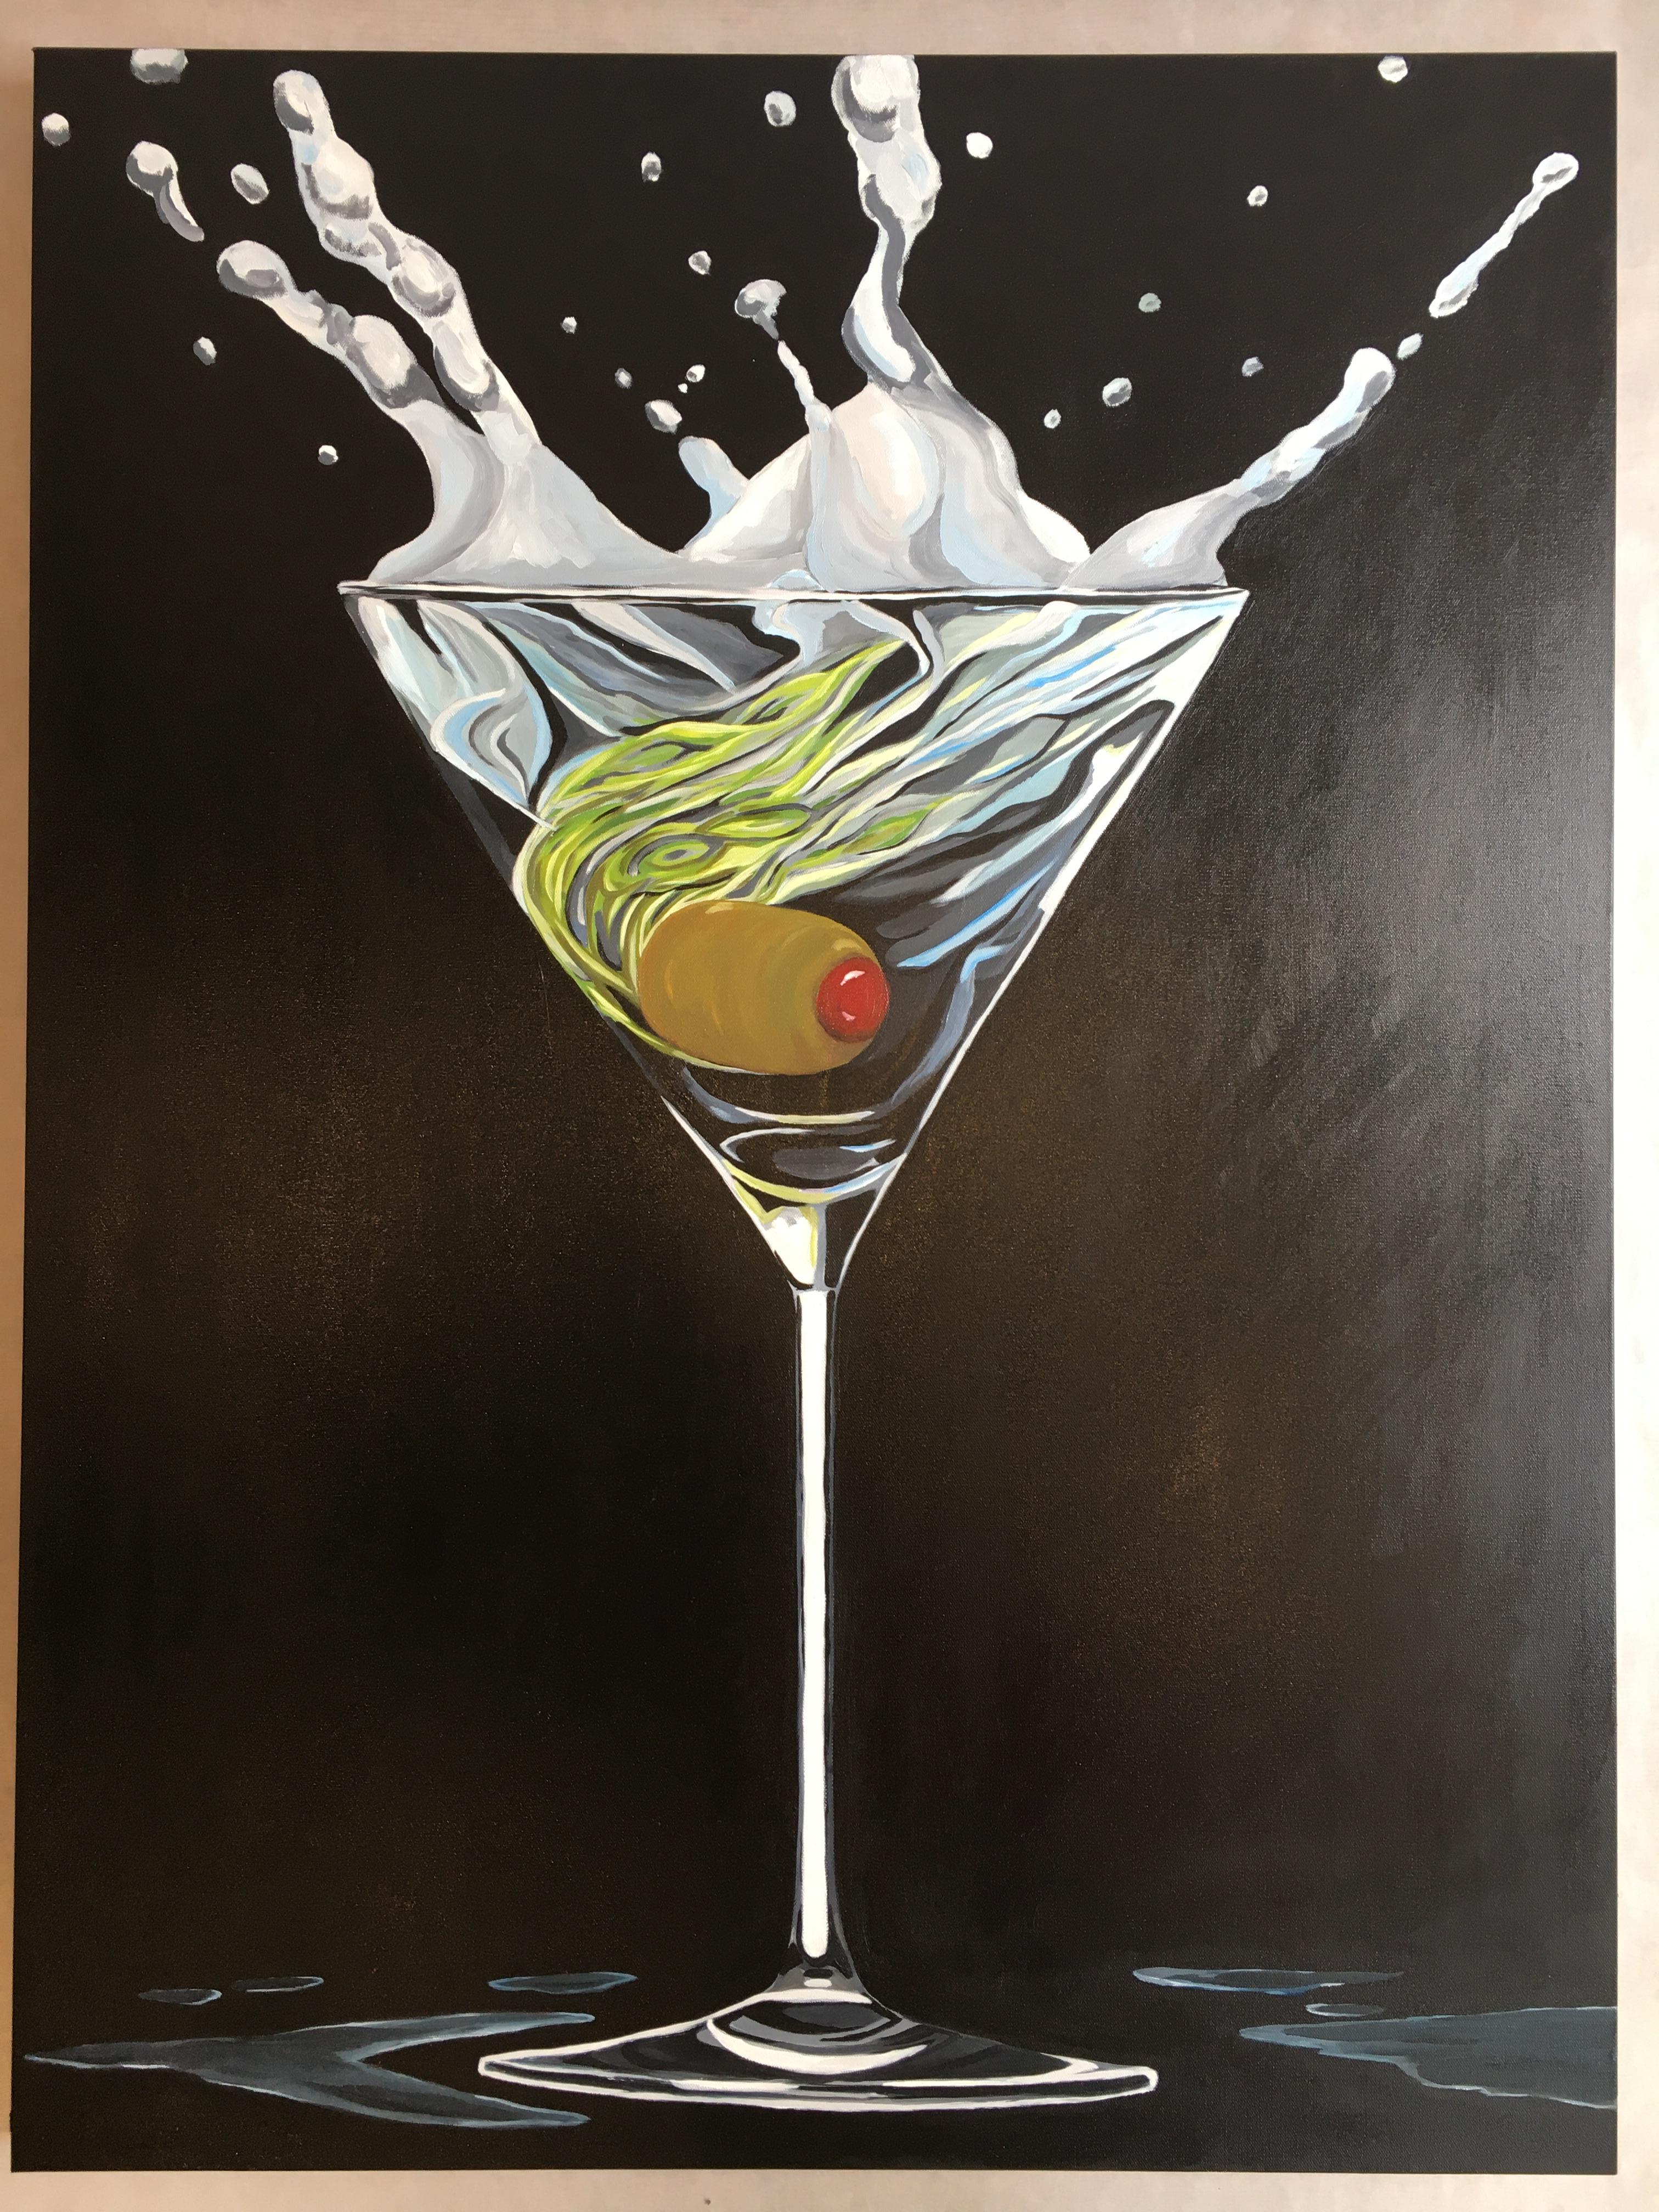 painting of a martini glass